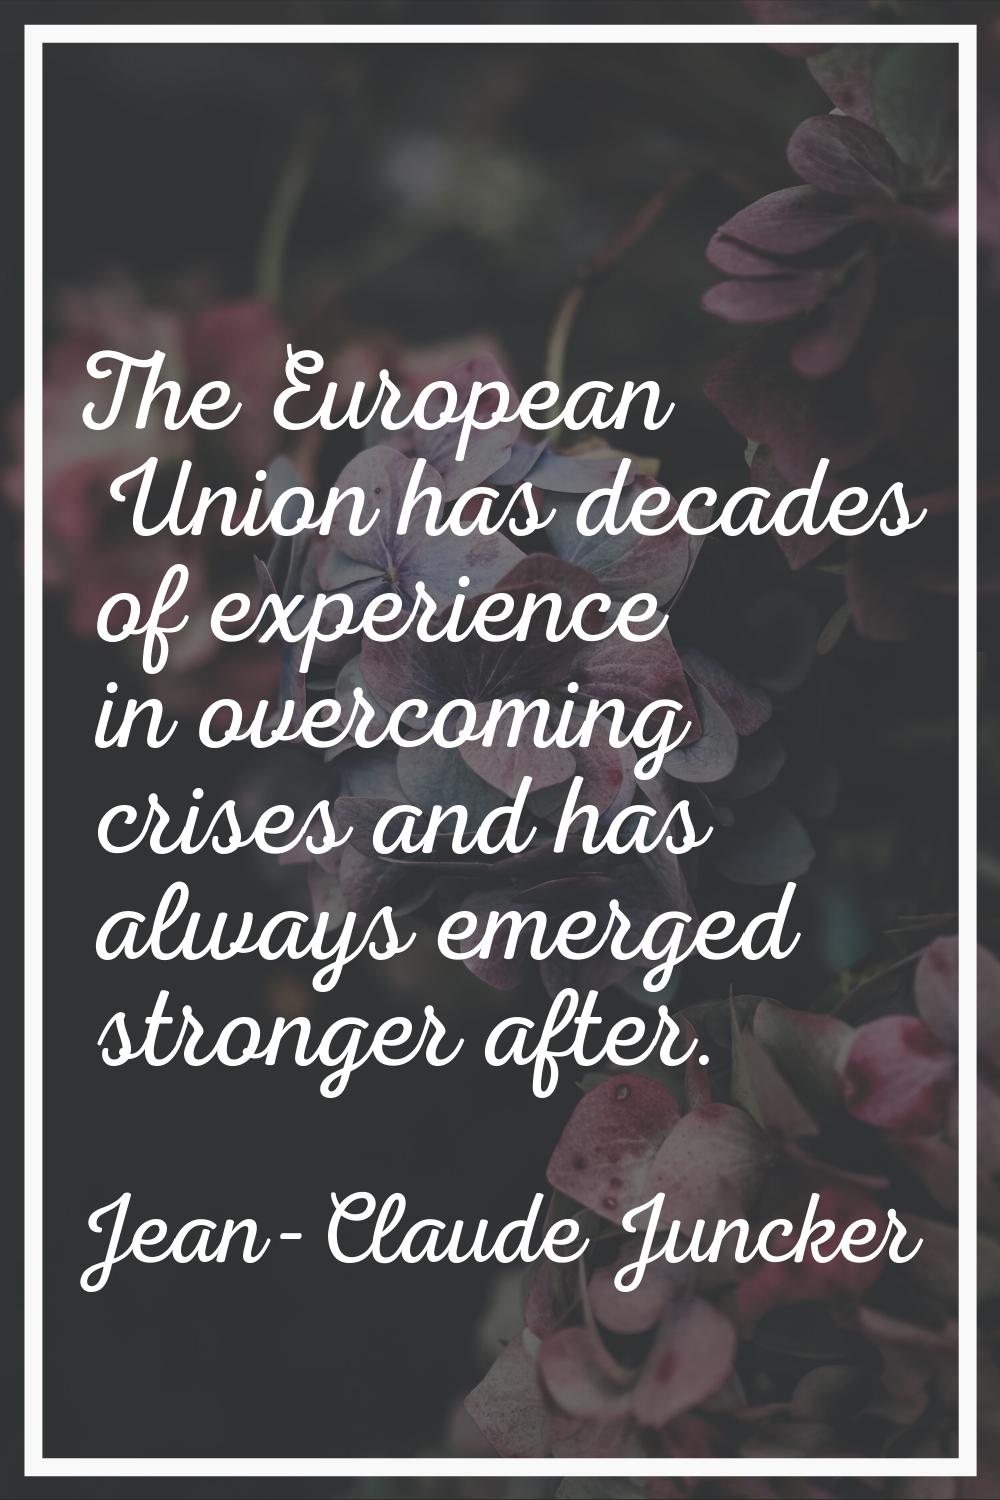 The European Union has decades of experience in overcoming crises and has always emerged stronger a